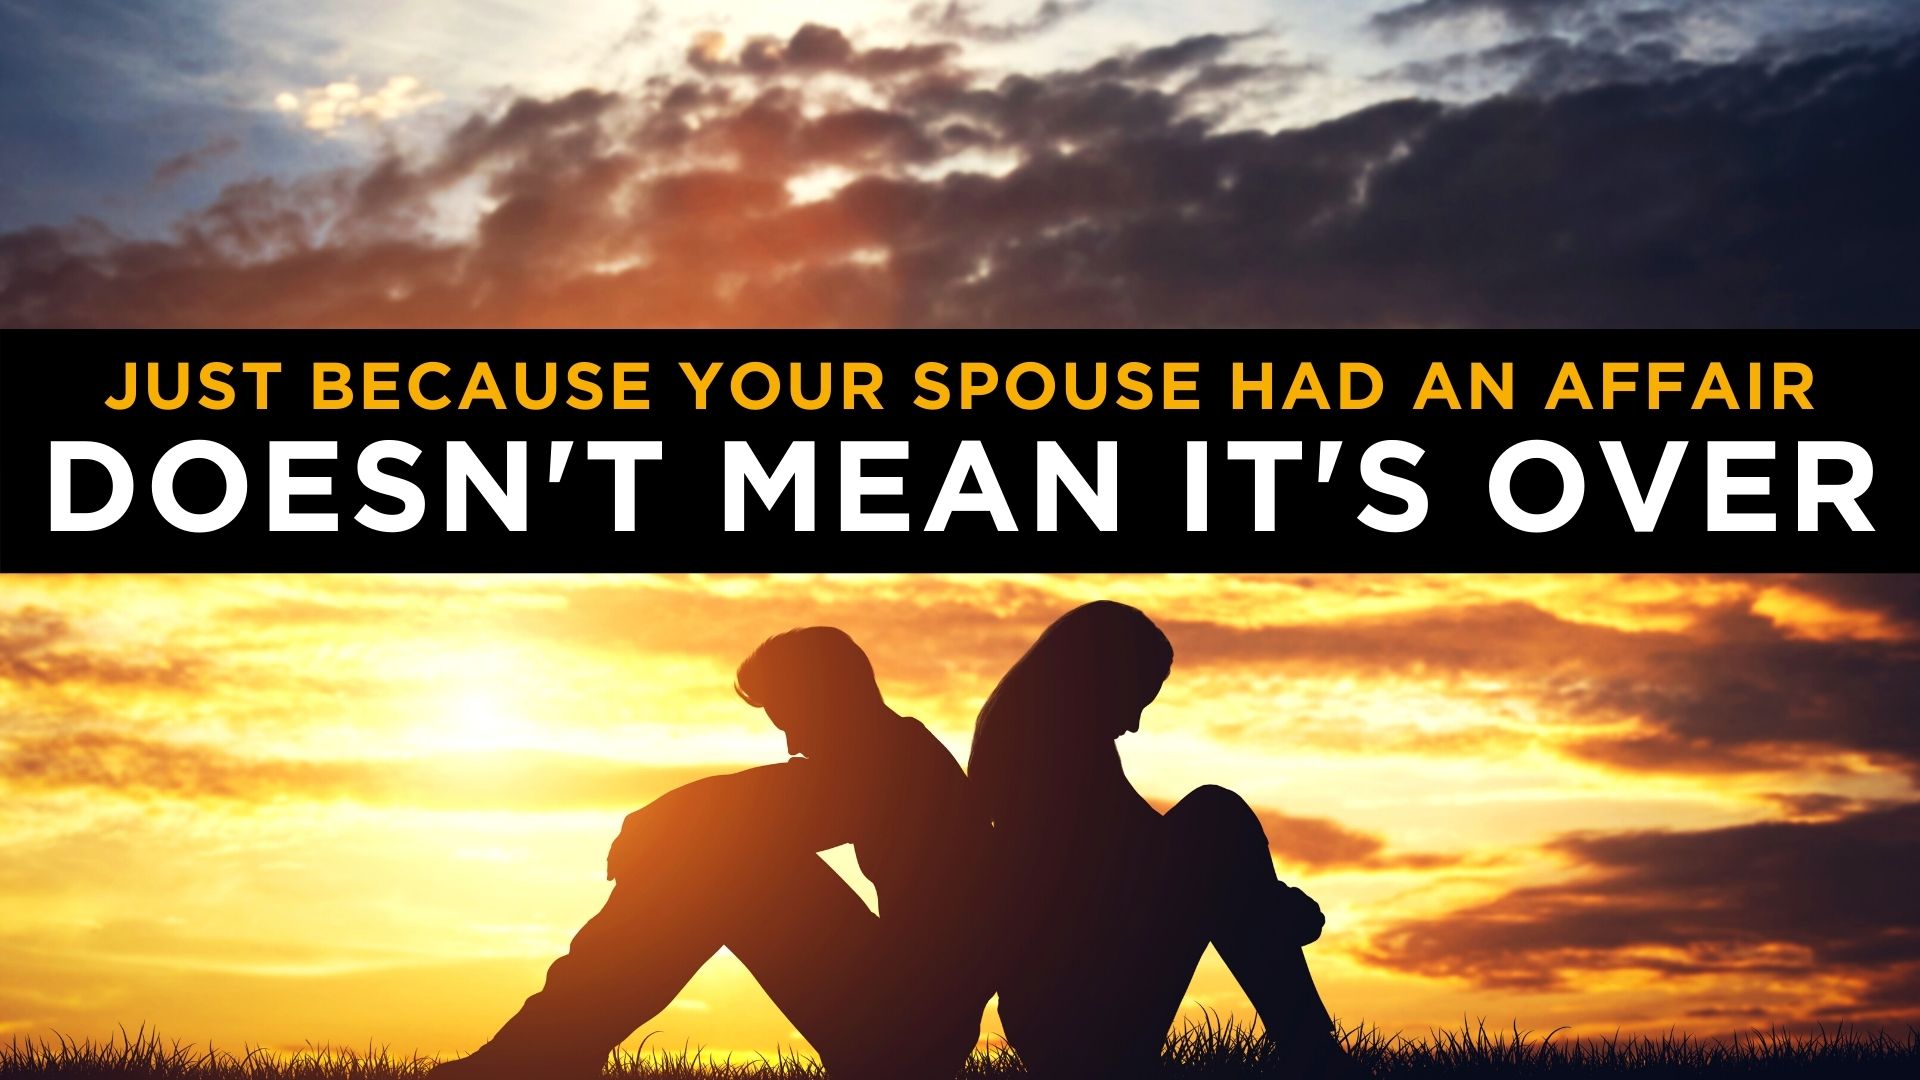 your spouse's affair doesn't mean your marriage is over